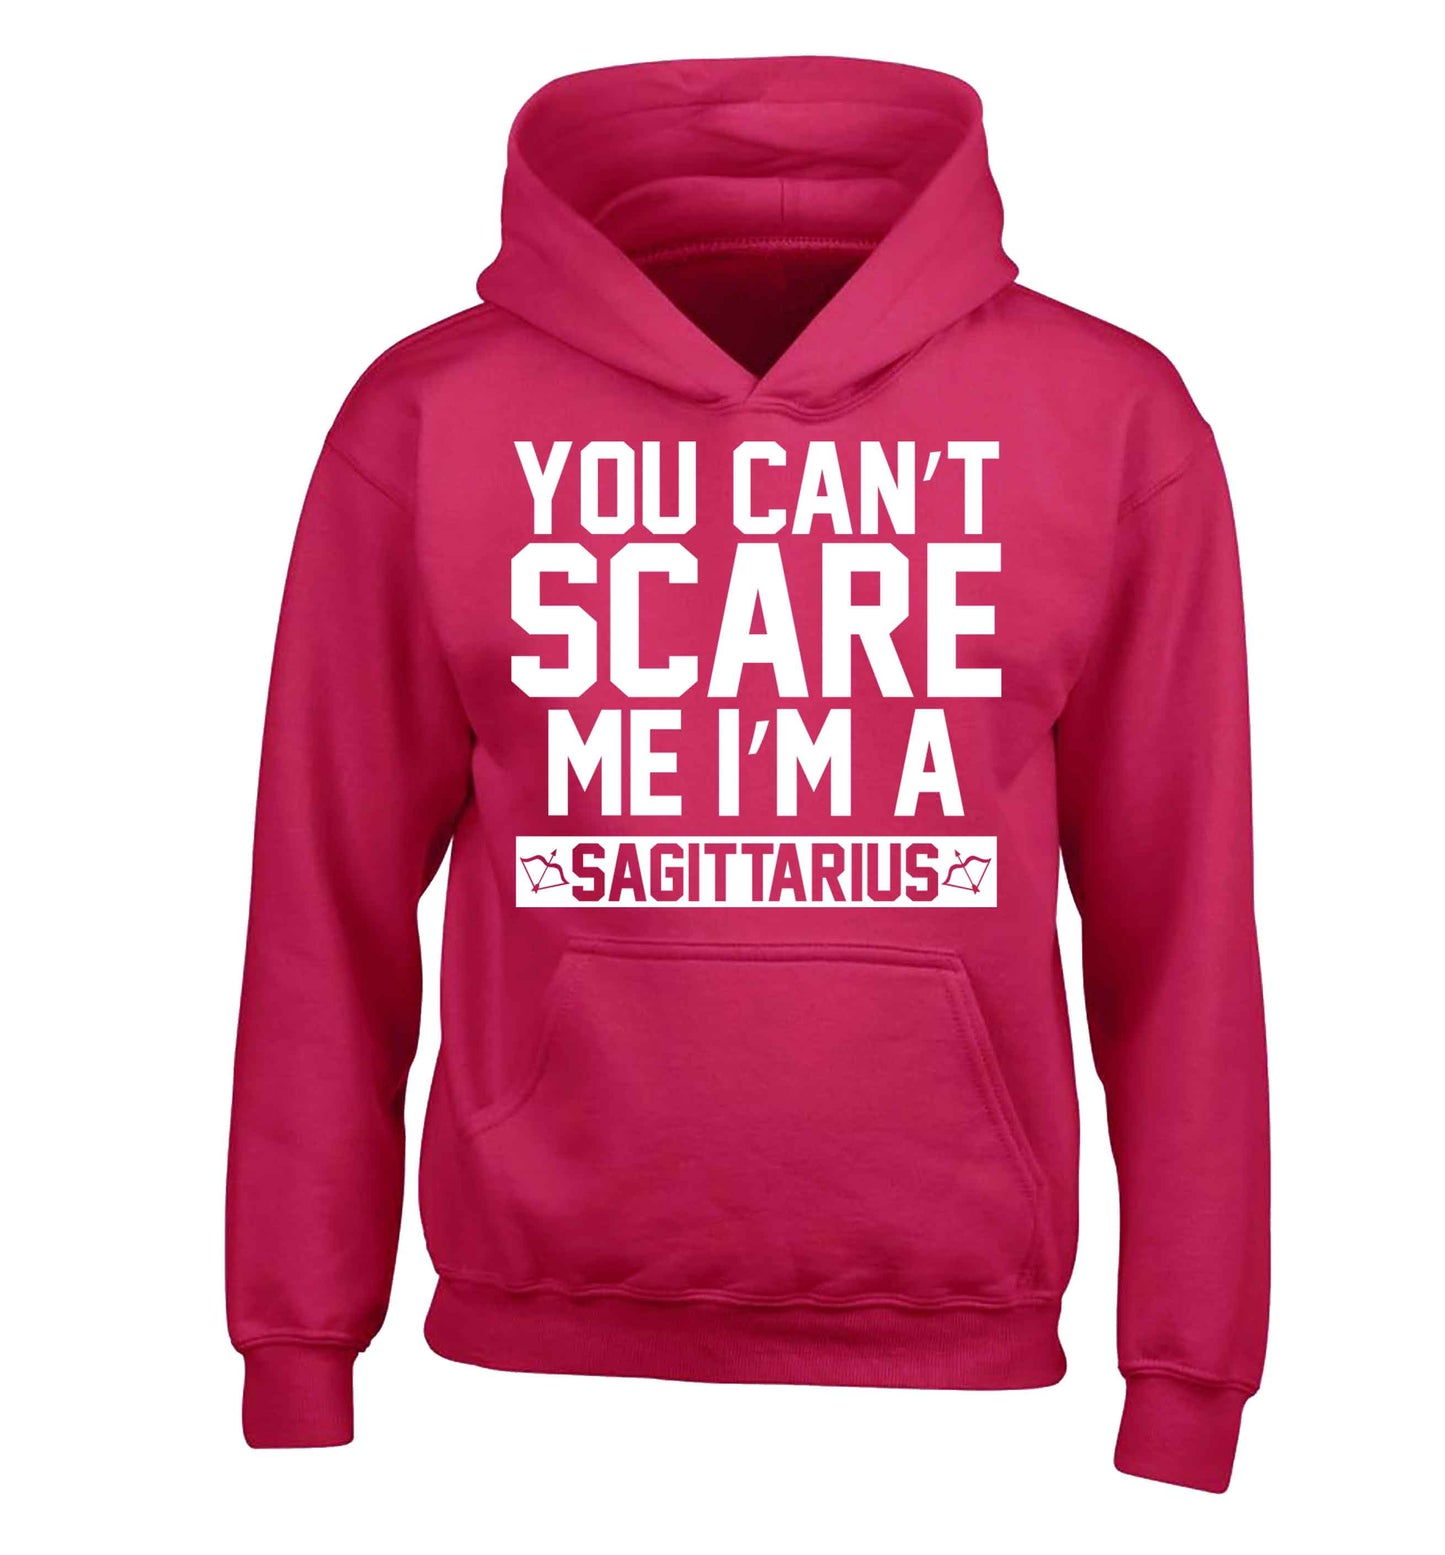 You can't scare me I'm a sagittarius children's pink hoodie 12-13 Years